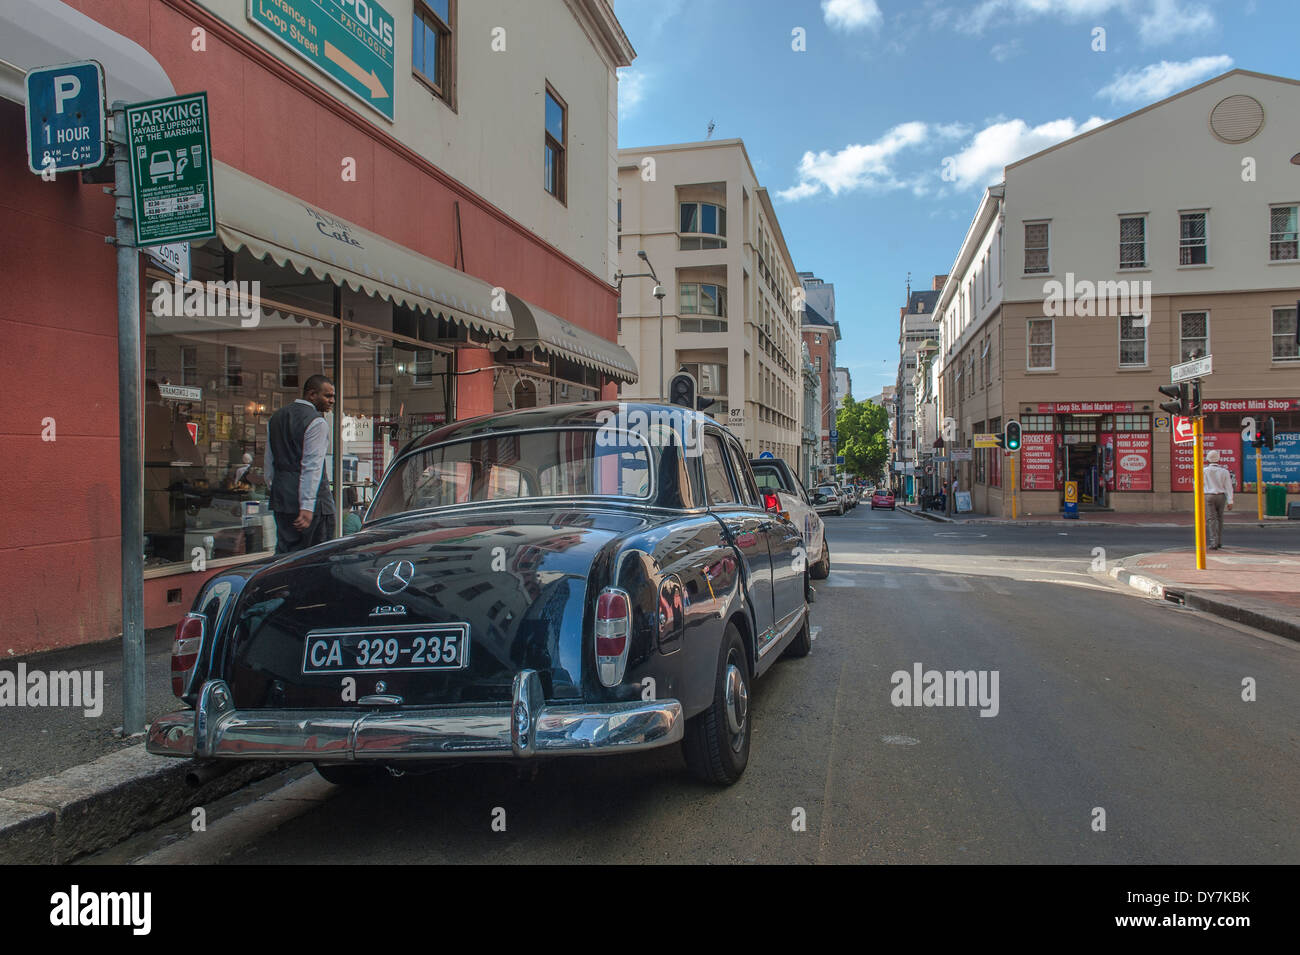 Back view of a black Mercedes 190 parked in a street in Cape Town, Western Cape, South Africa Stock Photo